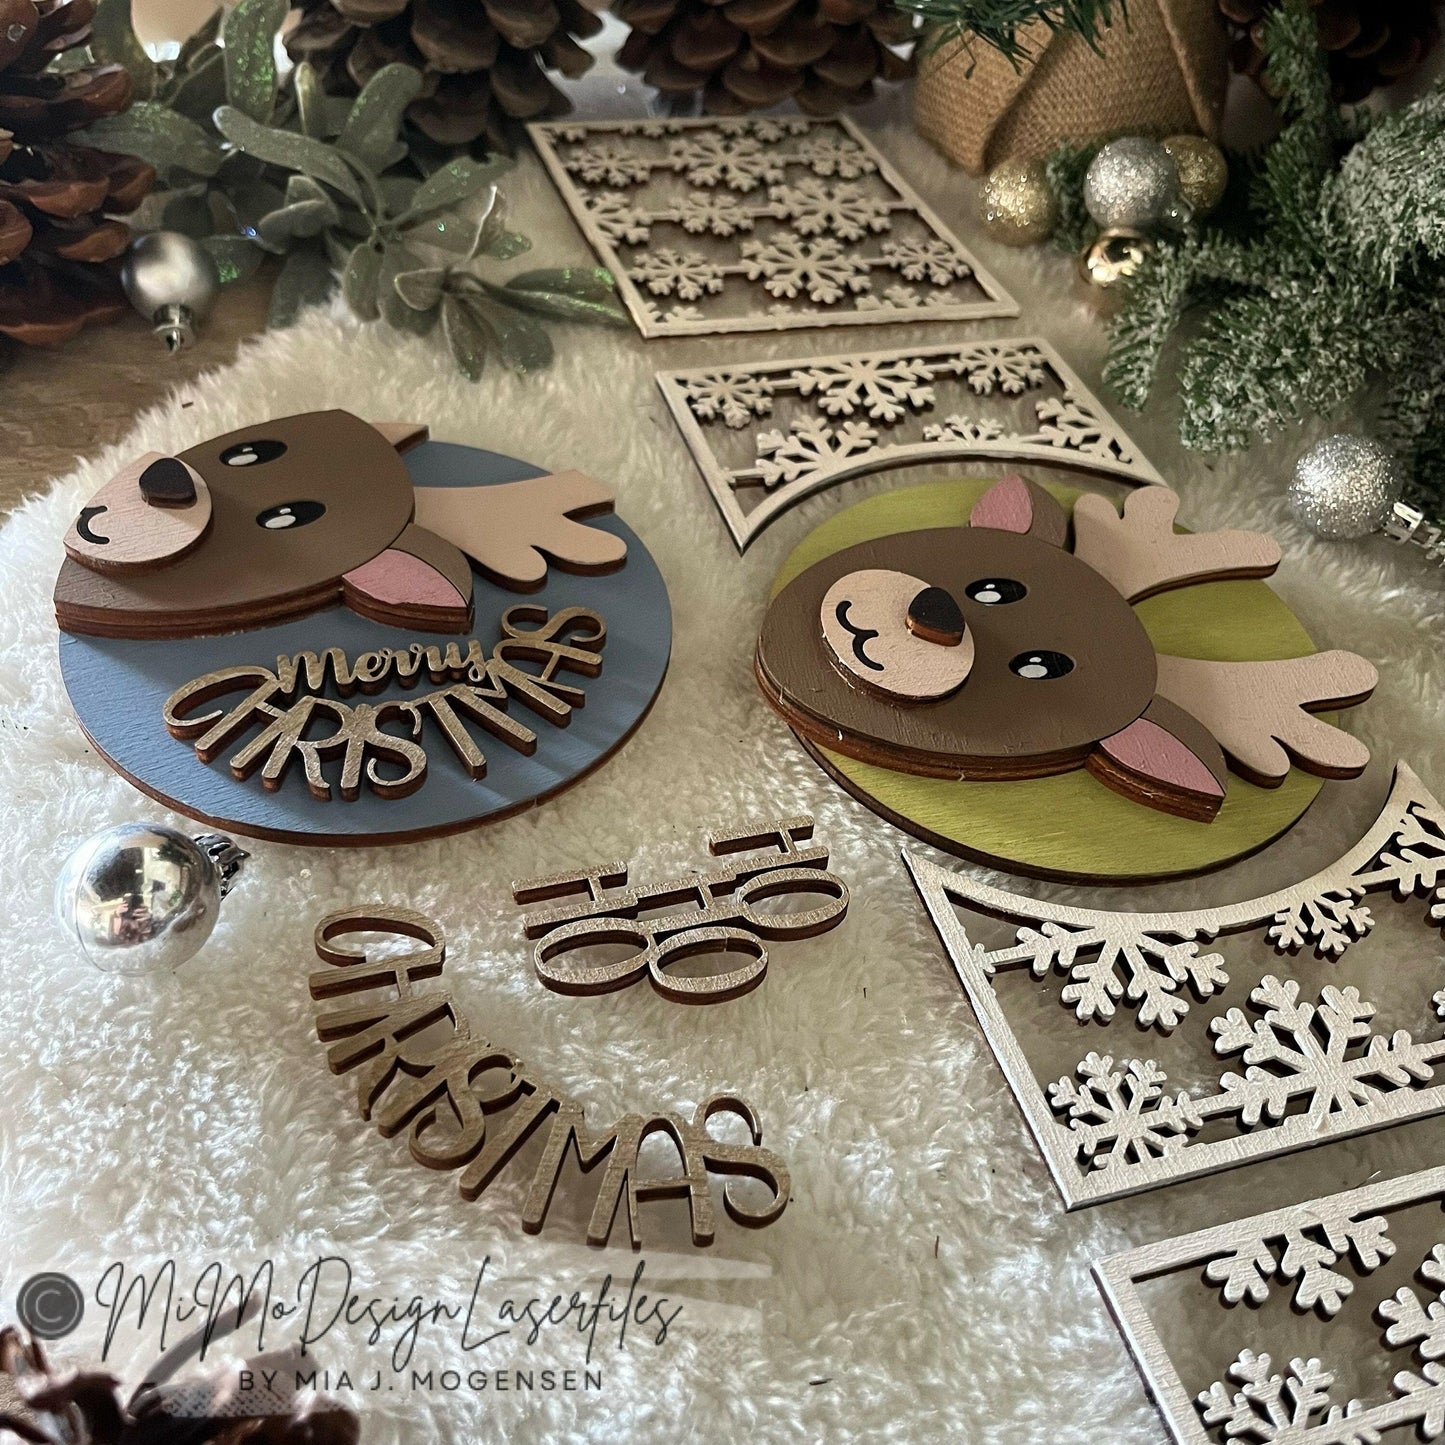 ADD ON 3D Reindeer with Snowflake pattern sides and text for MiMoDesignLaserfiles' Interchangeable Baskets